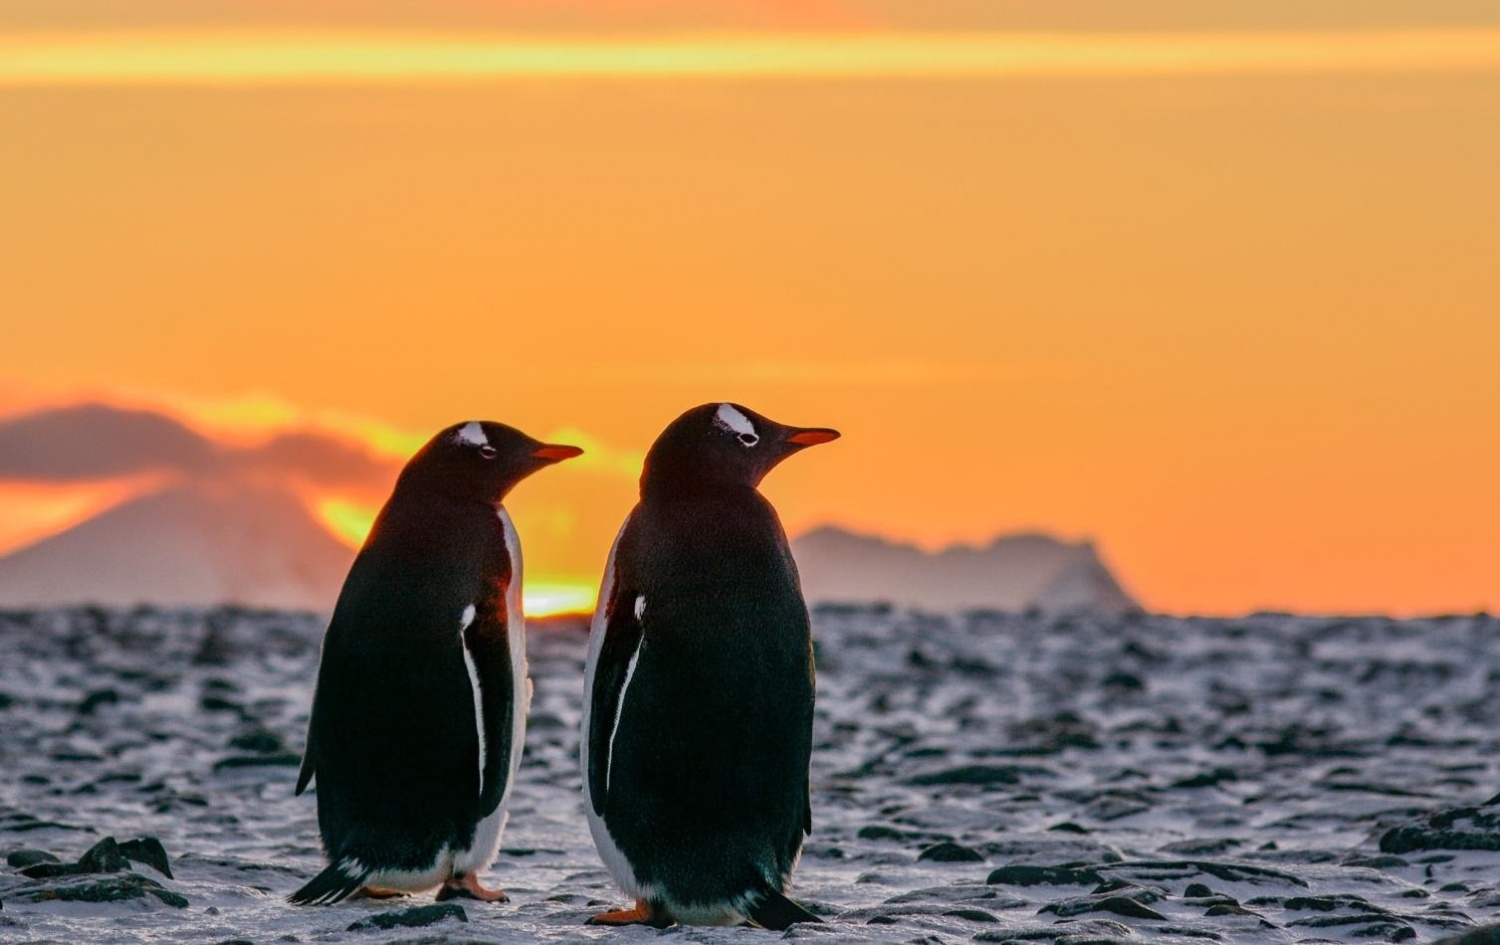 From Polar Landscapes to Roaming with Penguins, Discover the Wondrous Antarctic 